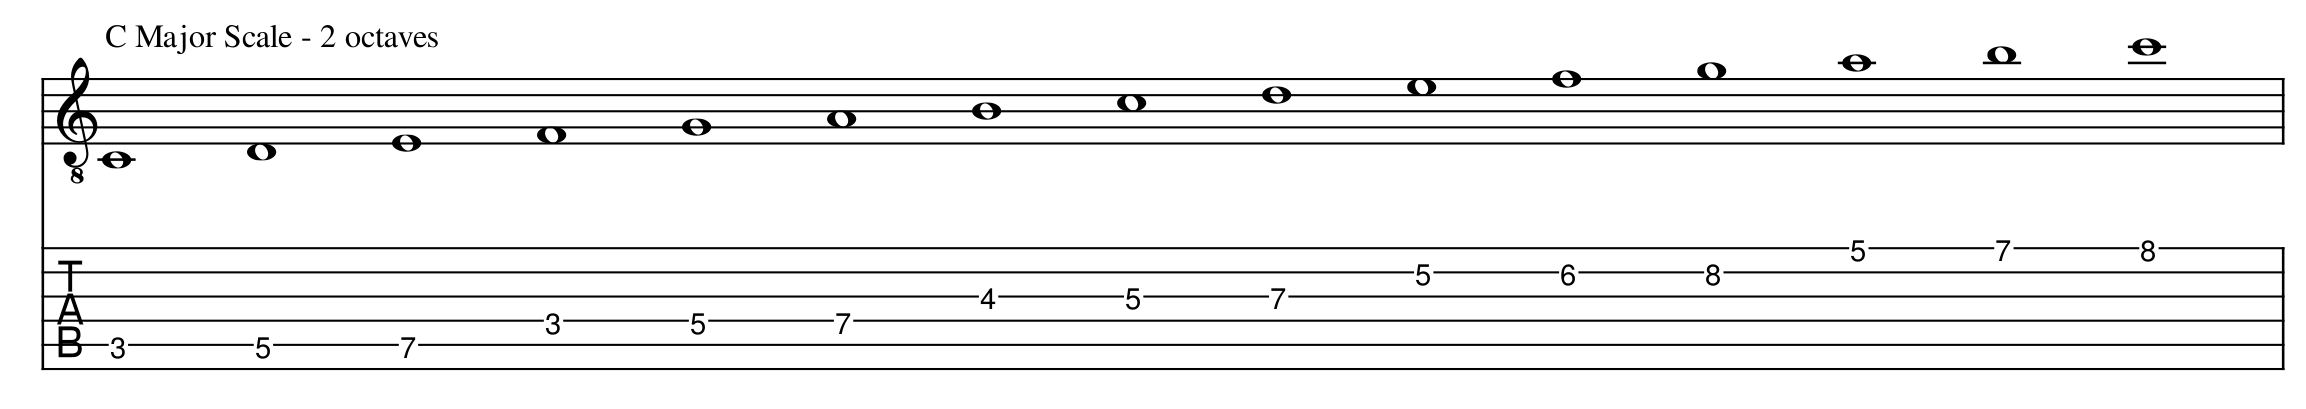 The C Major scale tablature and standard notation